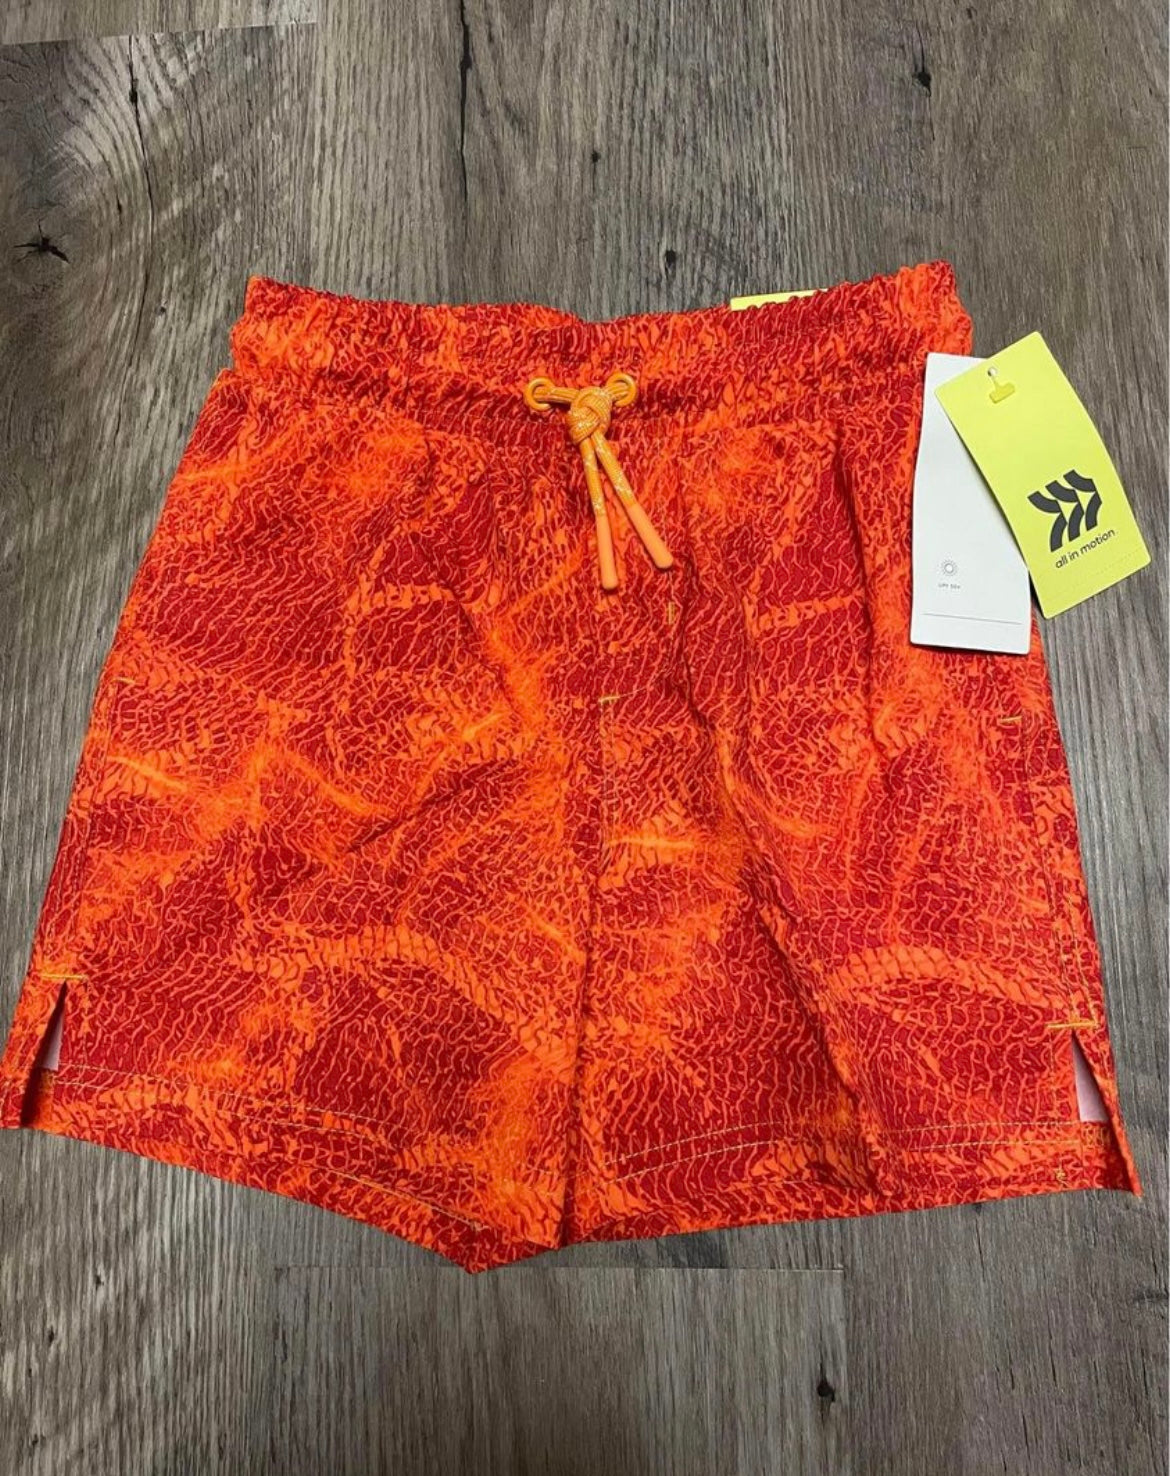 New all in motion boy size XS 4/5 shorts